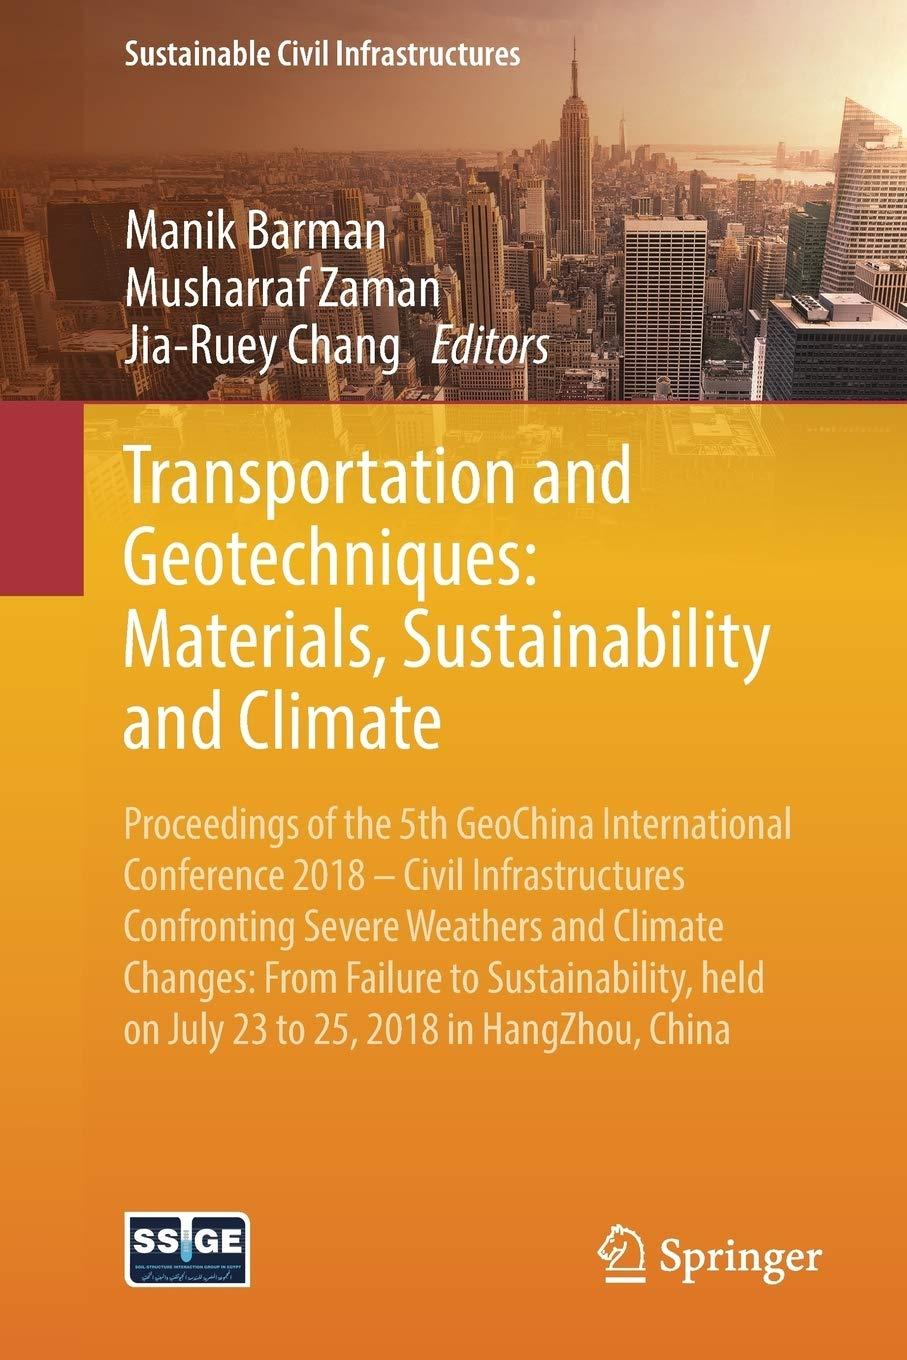 transportation and geotechniques: materials, sustainability and climate proceedings of the 5th geochina